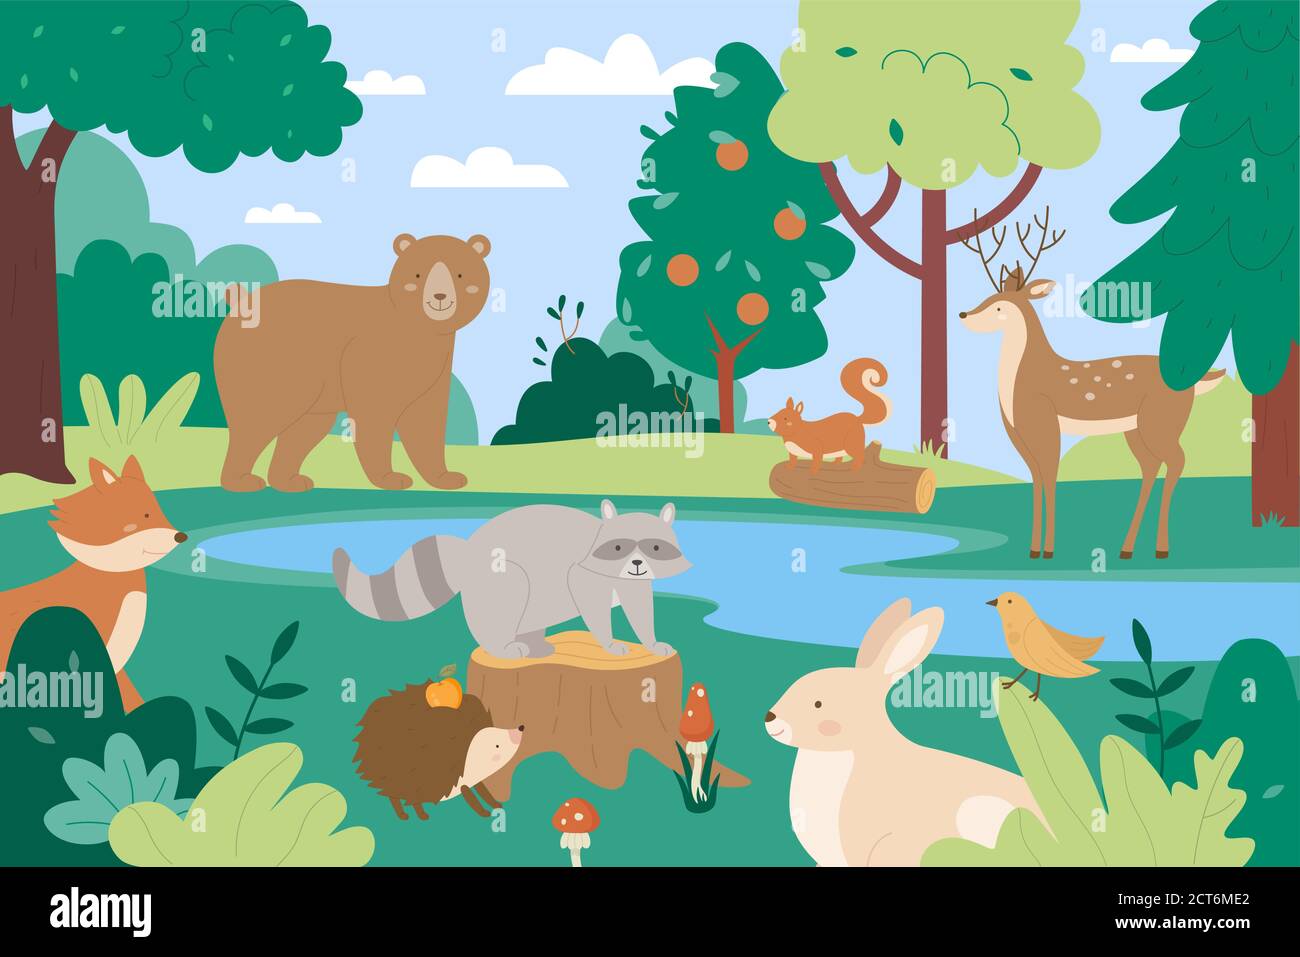 Animals in summer forest vector illustration. Cartoon flat funny animalistic characters enjoy summertime scenic green trees and natural blue lake together, cute forest wild nature scenery background Stock Vector